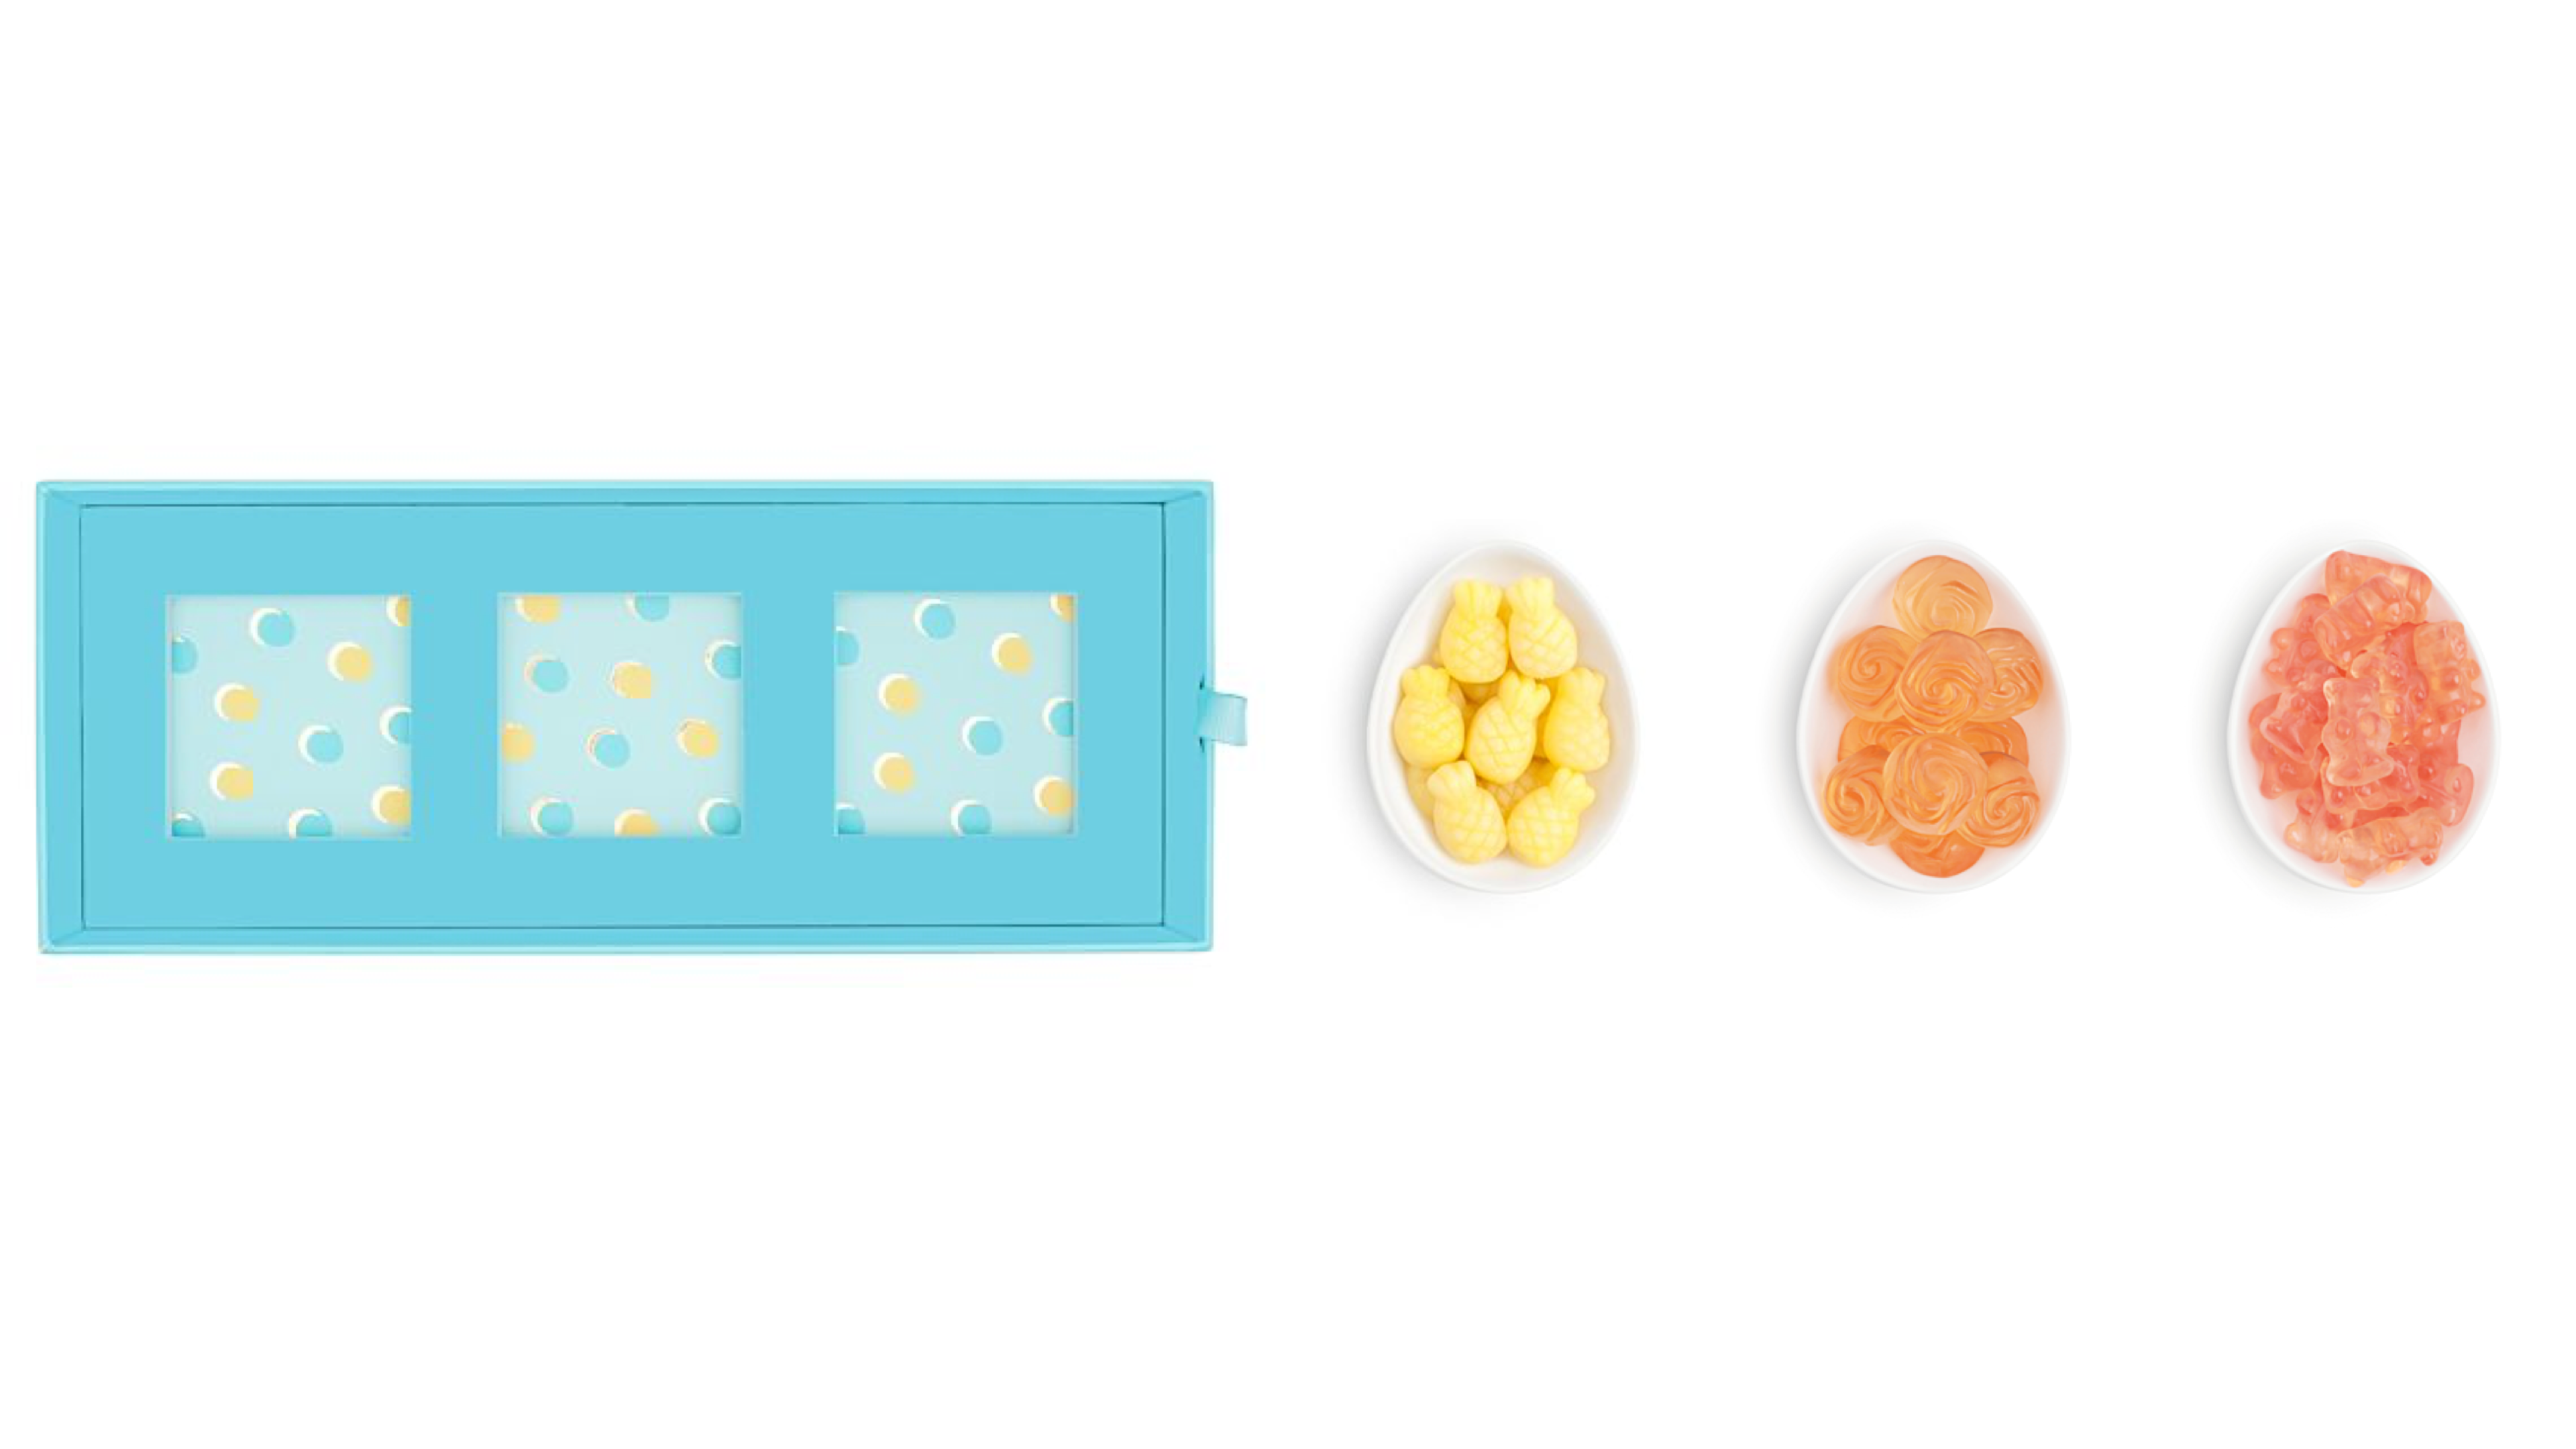 sugarfina thank you pack with three types of candies you can personalize